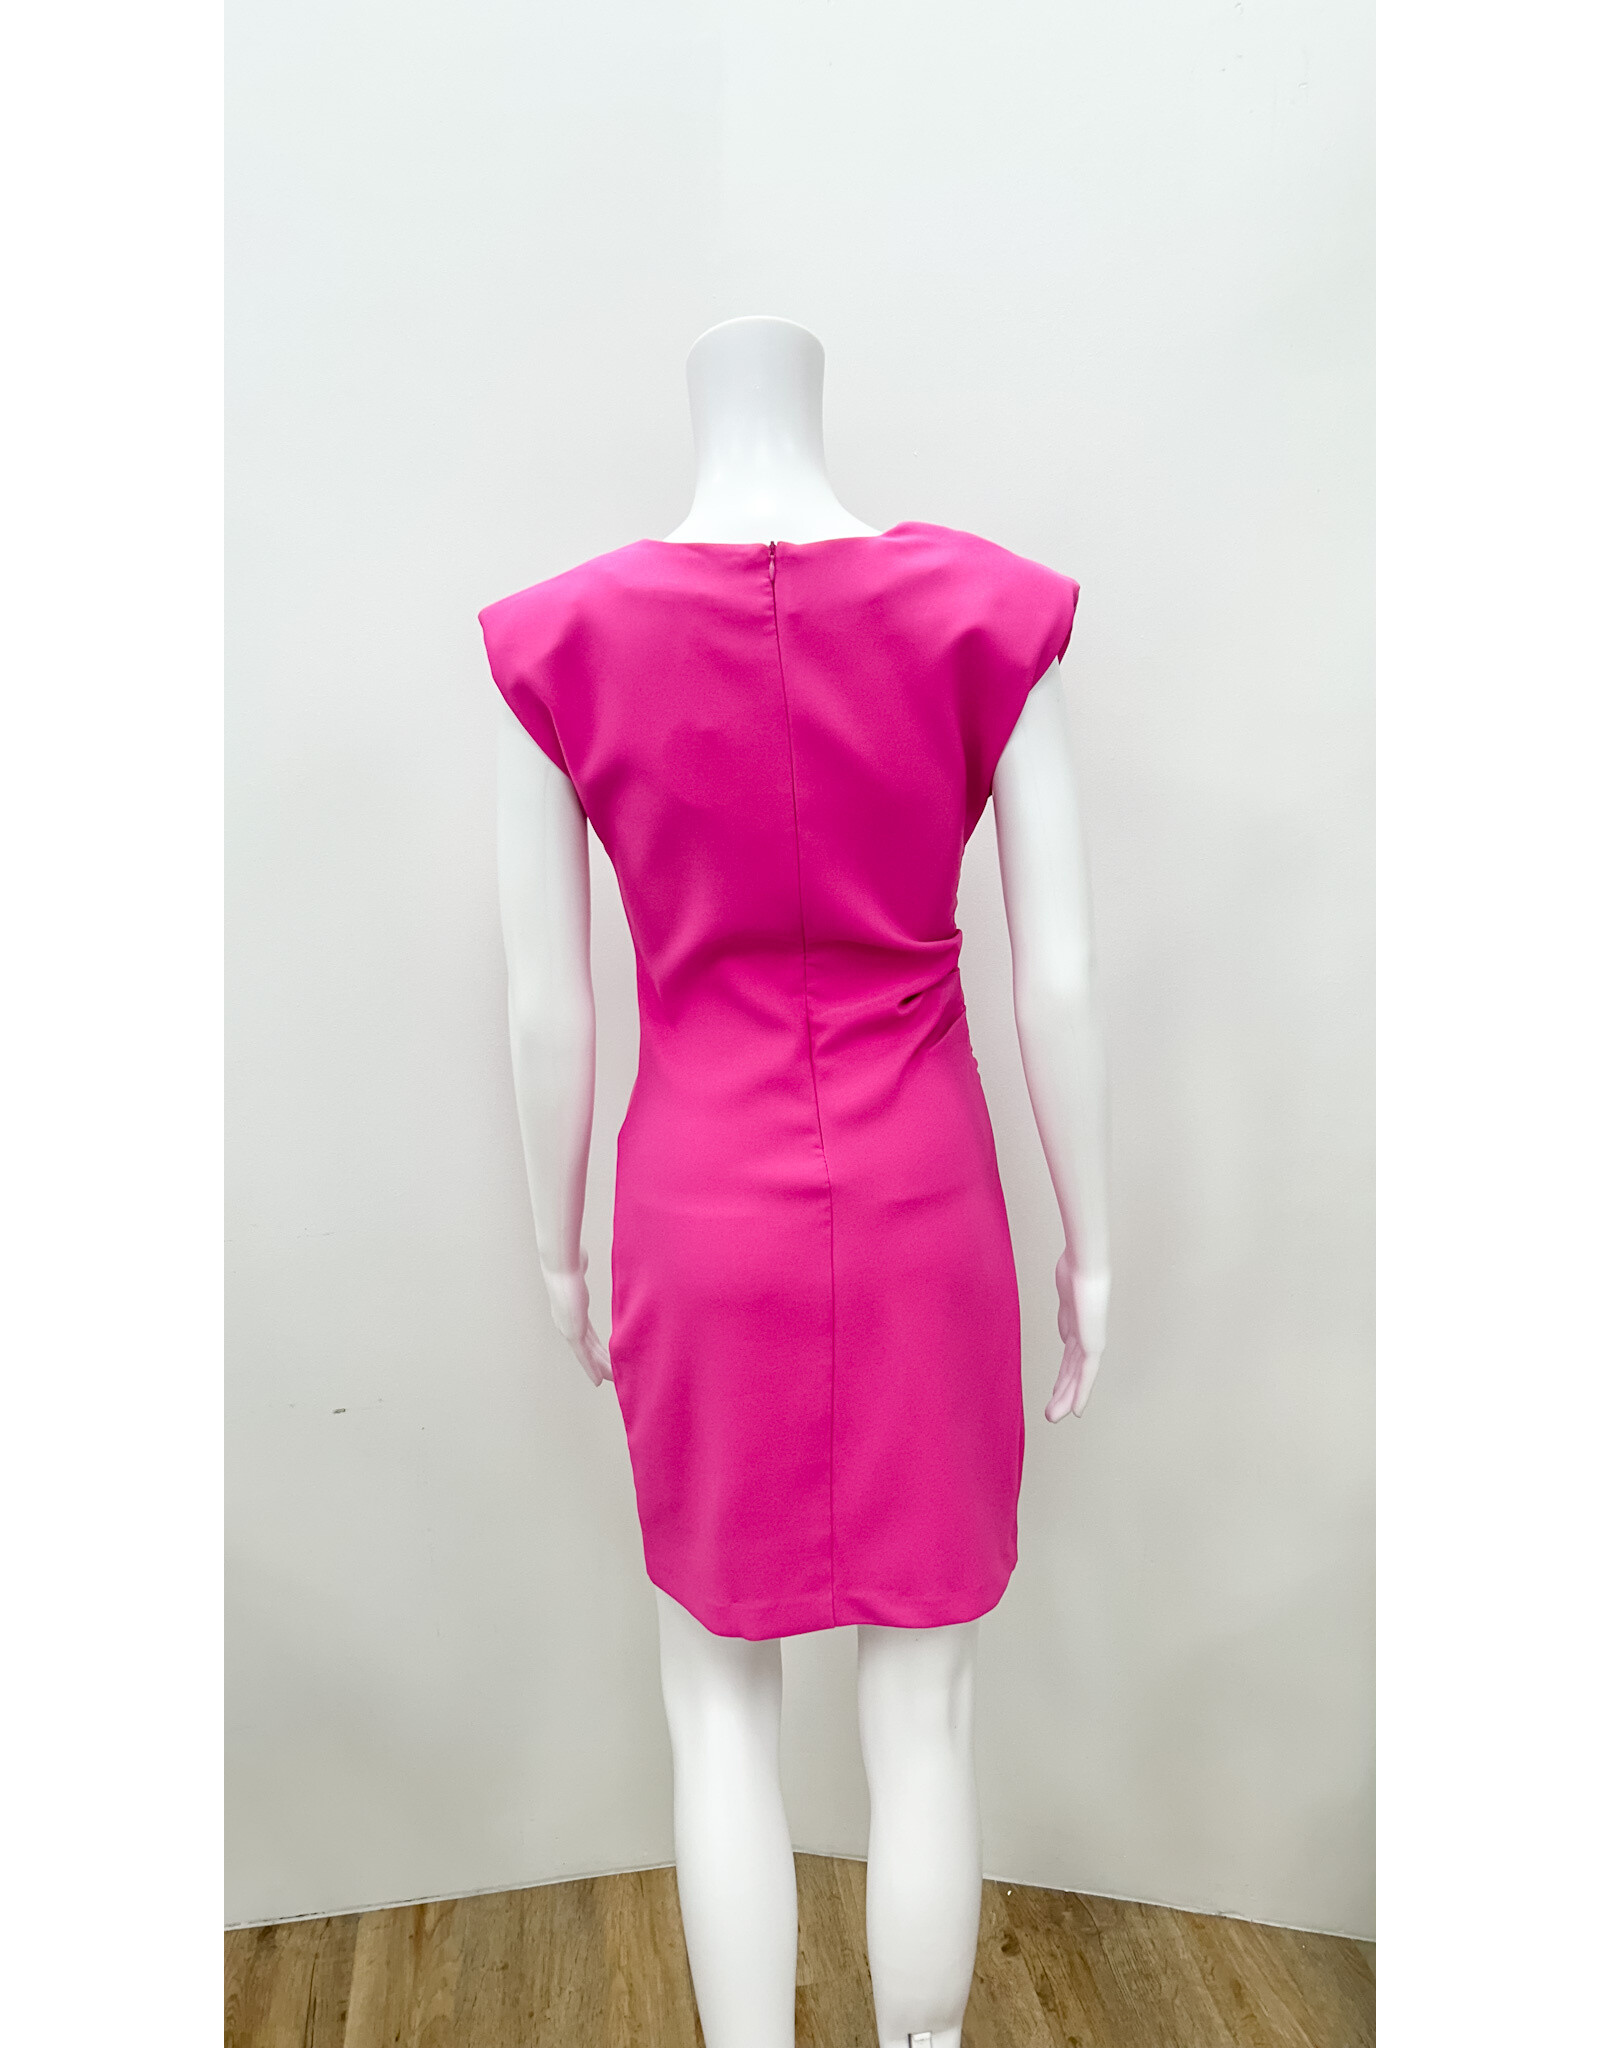 Hot Pink Ruched Dress